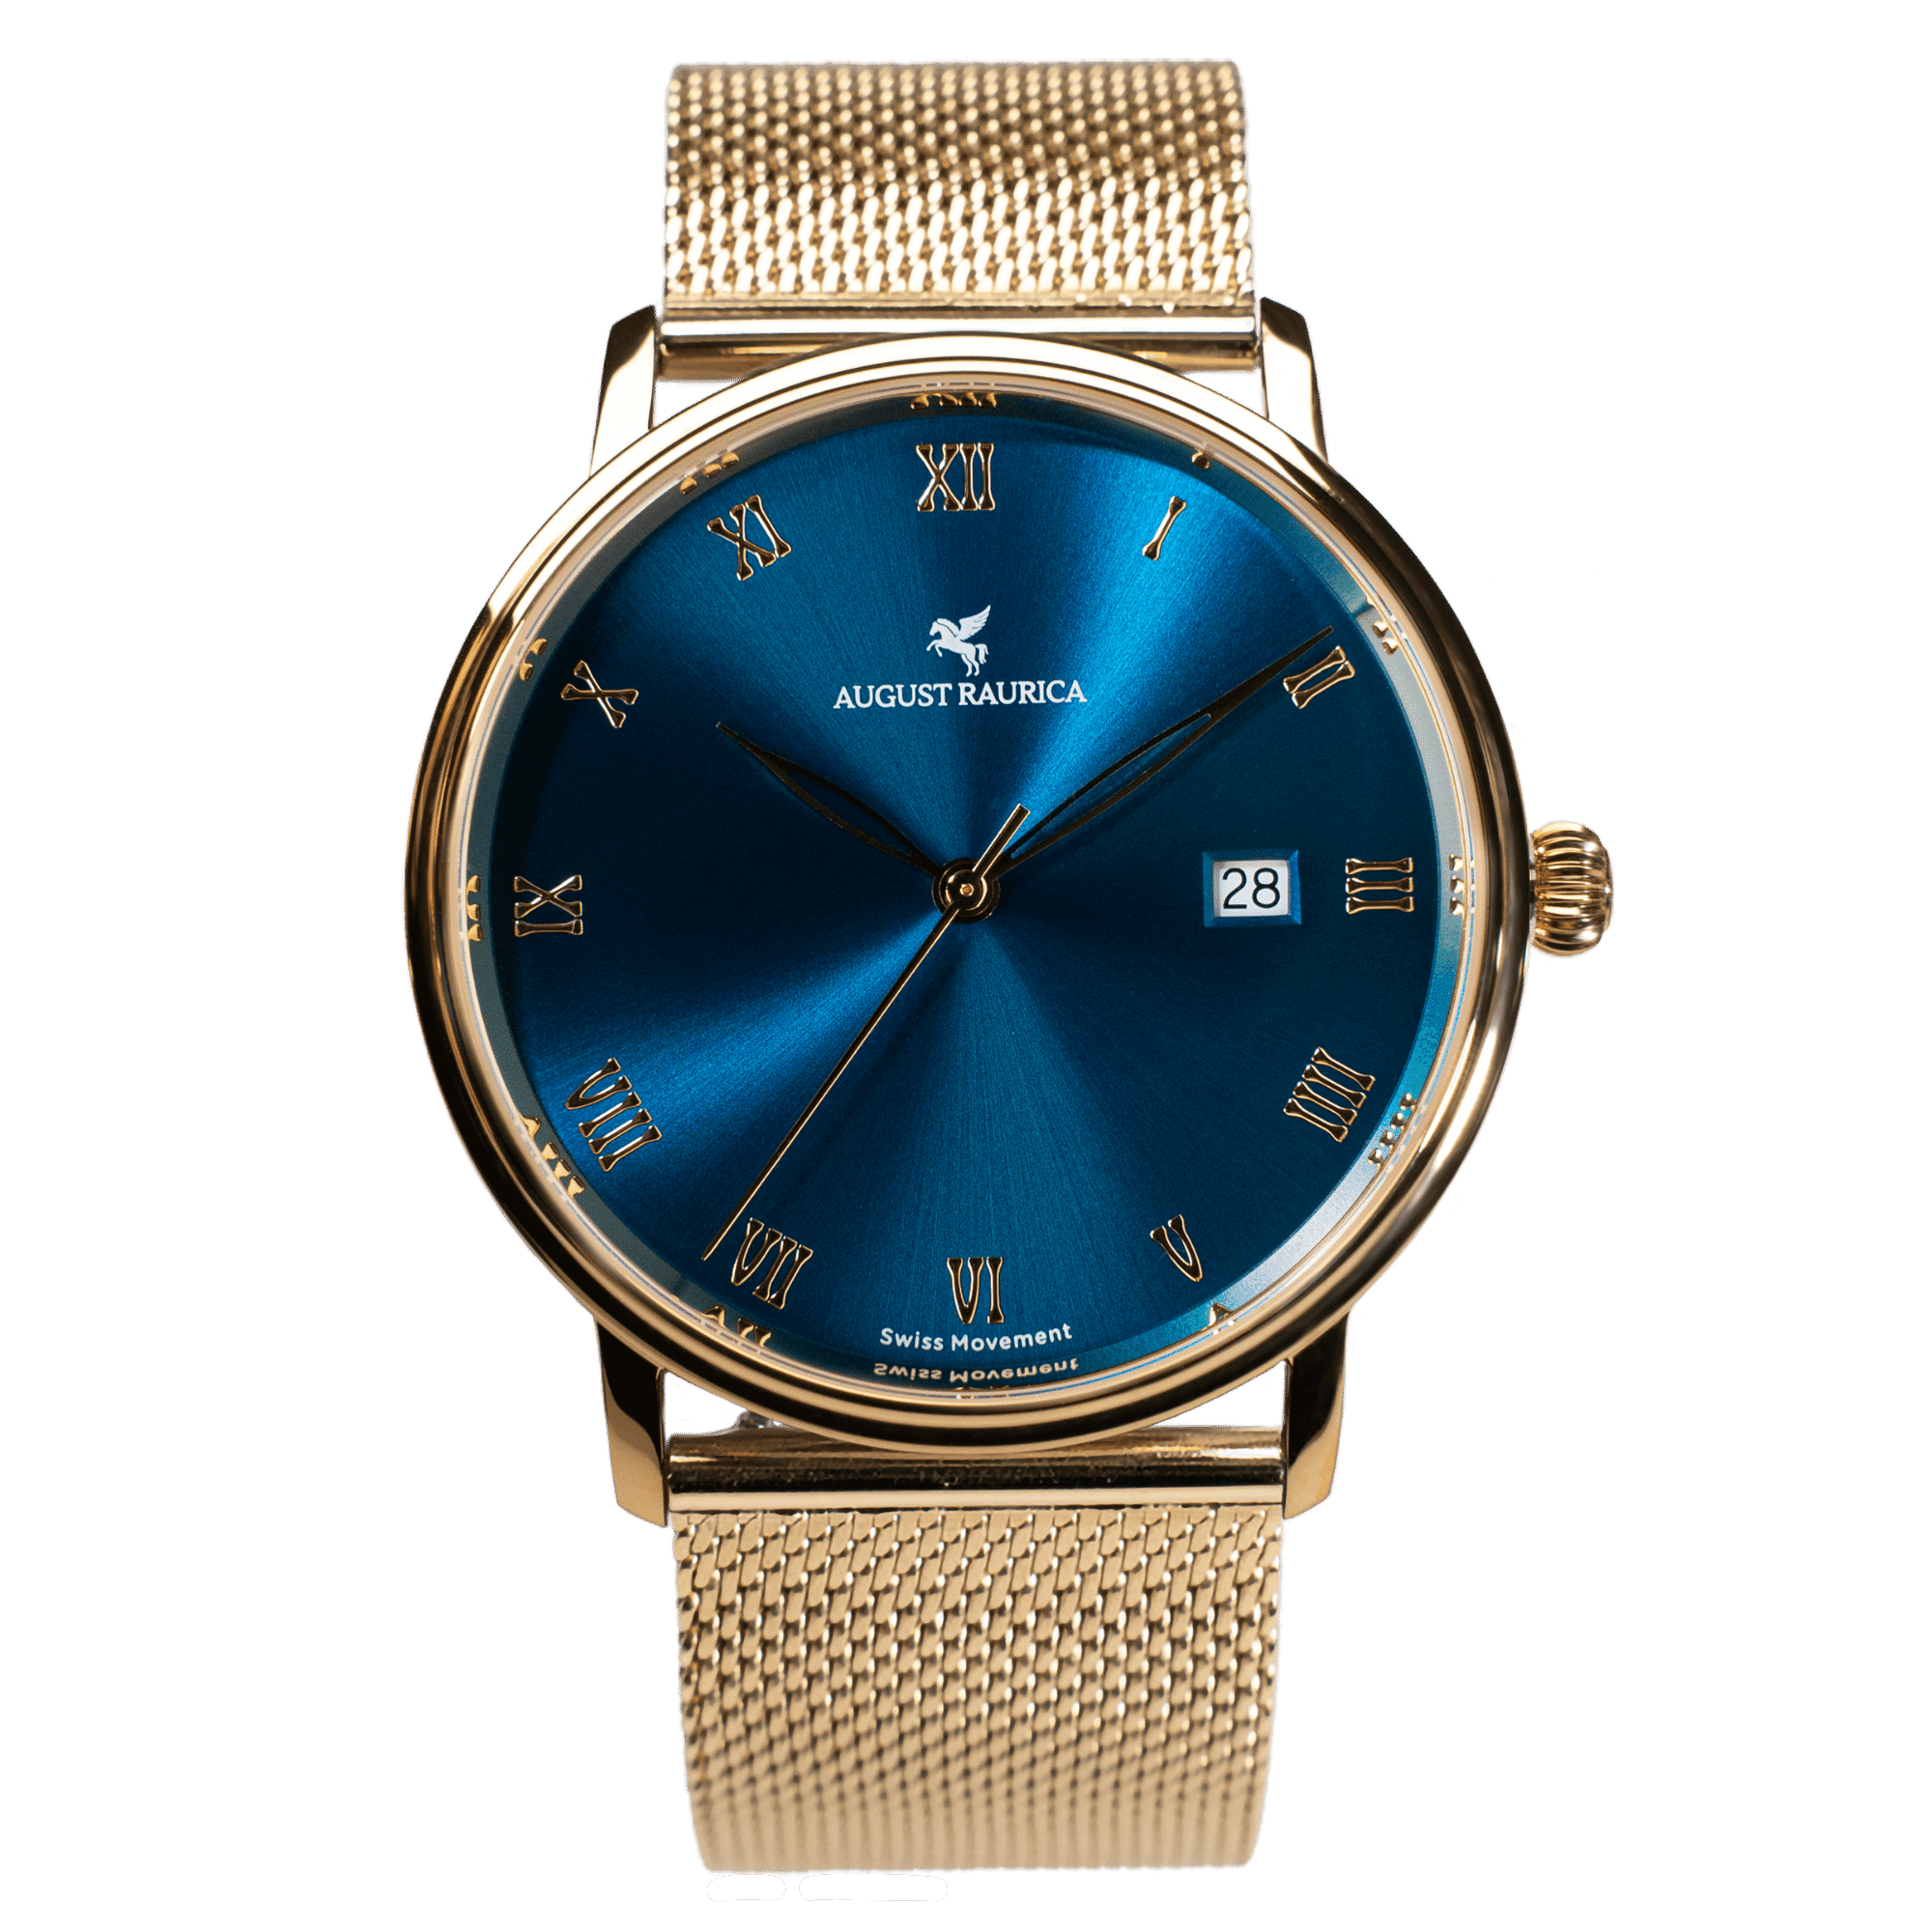 Affordable Swiss Excellence: August Raurica Watches" Description: Immerse yourself in Swiss excellence without the premium price. Our 500-piece limited edition collection boasts Swiss Movement, 5-year warranty, and timeless design.